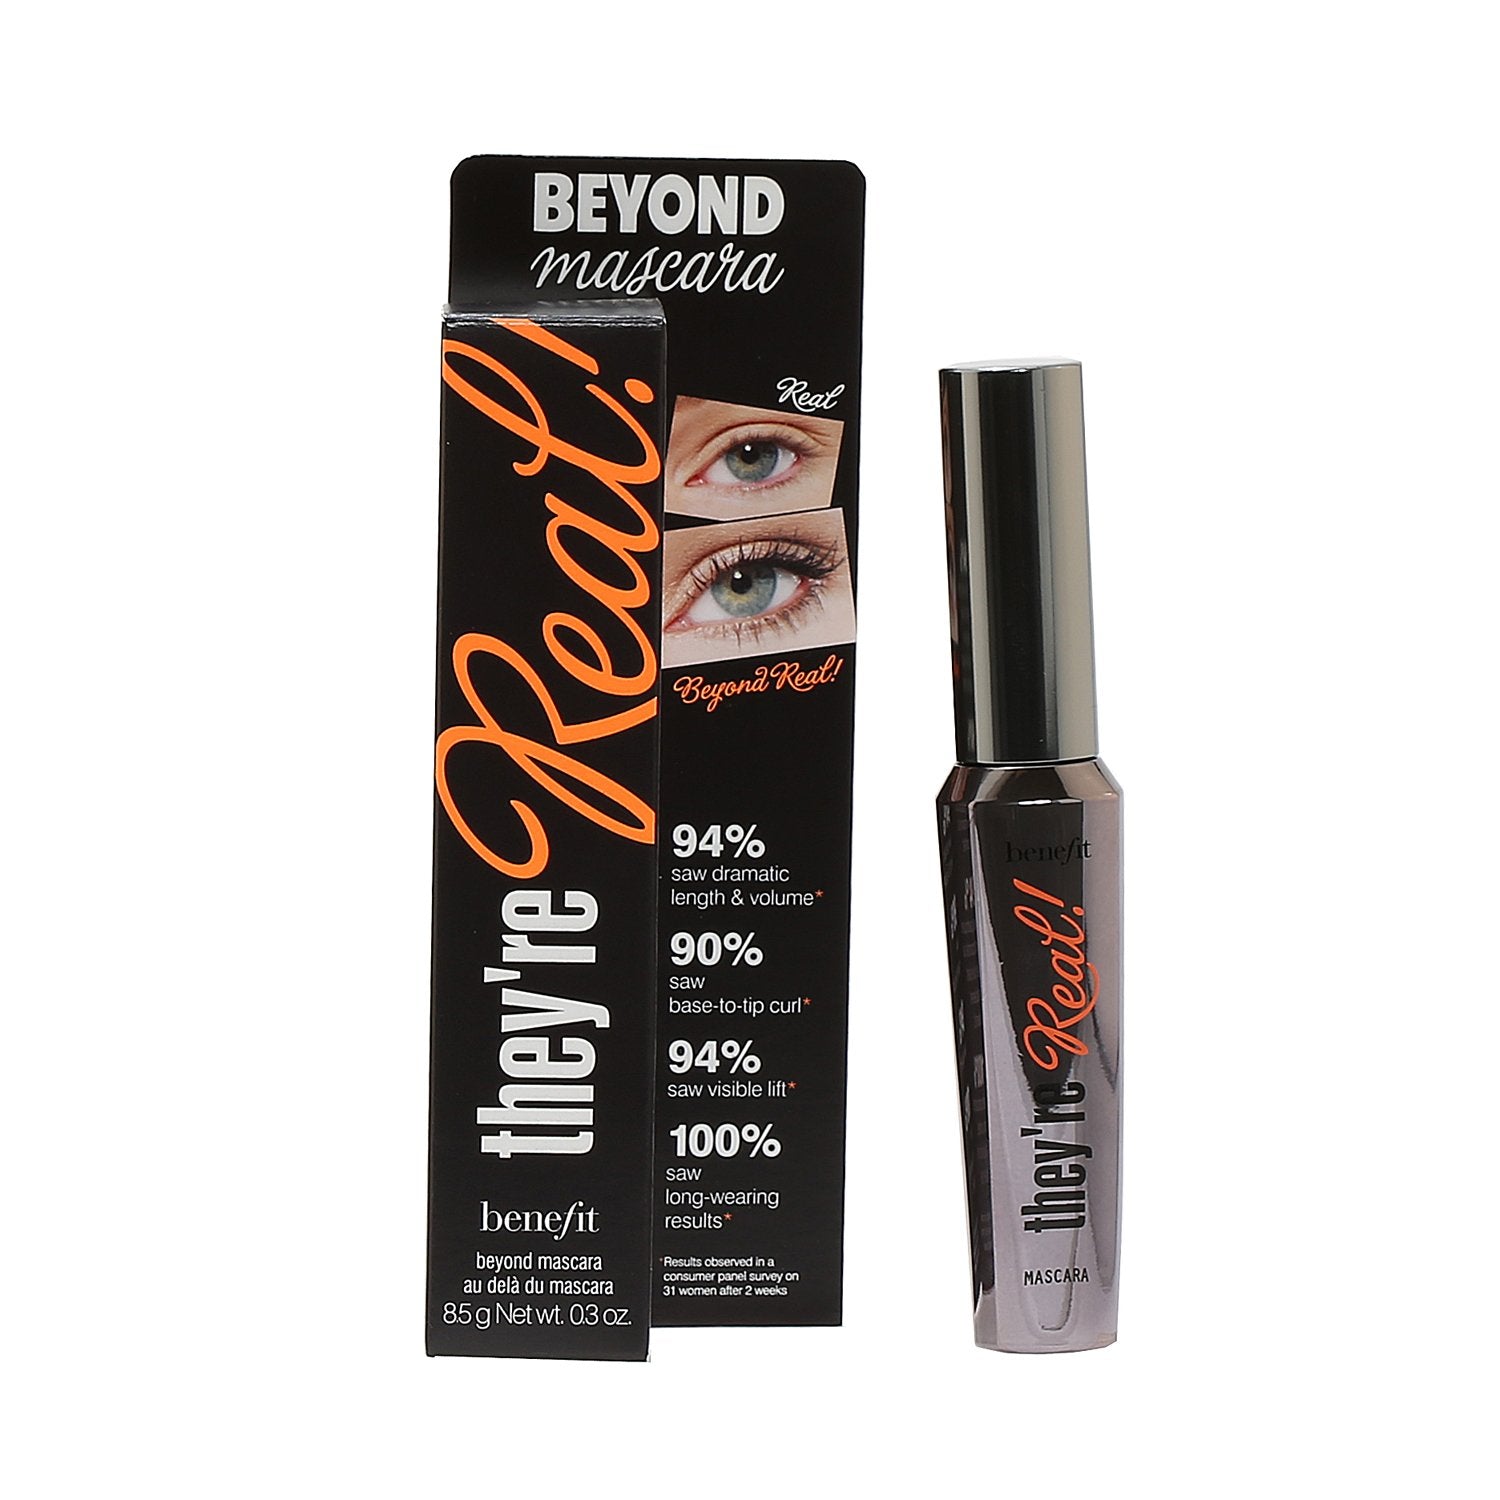 Benefit Mascaras Are 50% Off at Ulta Right Now